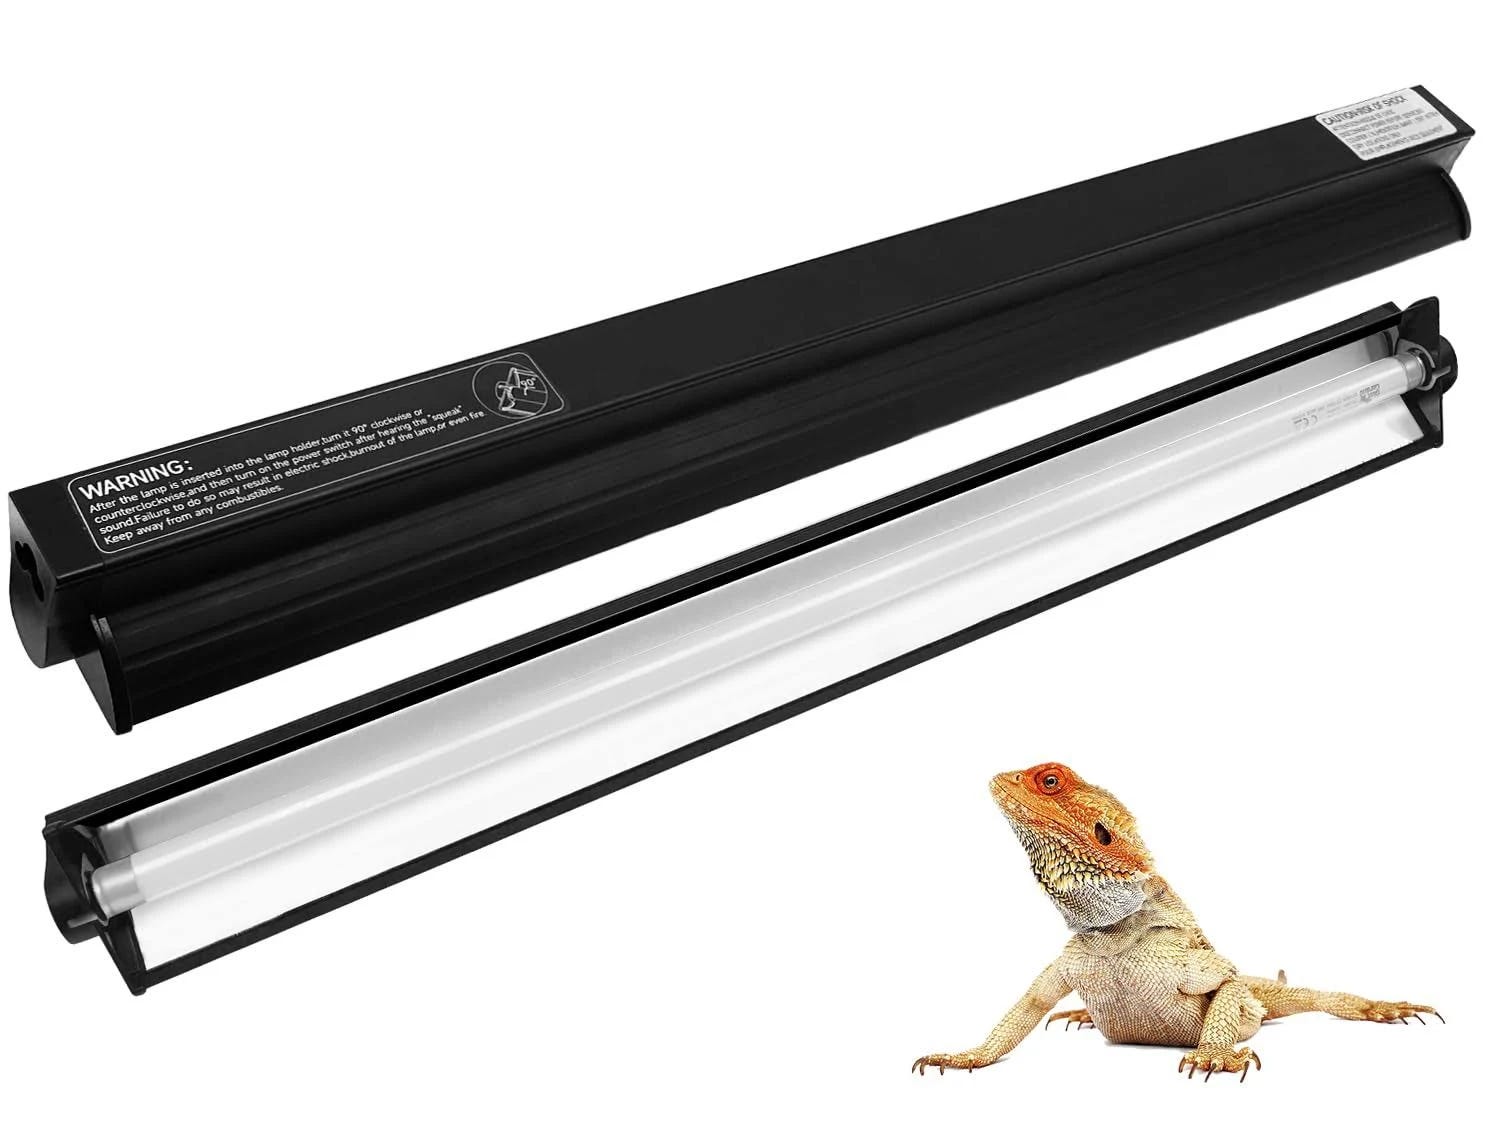 10.0/5.0 UVB T5 Reptile Light Fixture for Rainforest and Desert Pets | Image